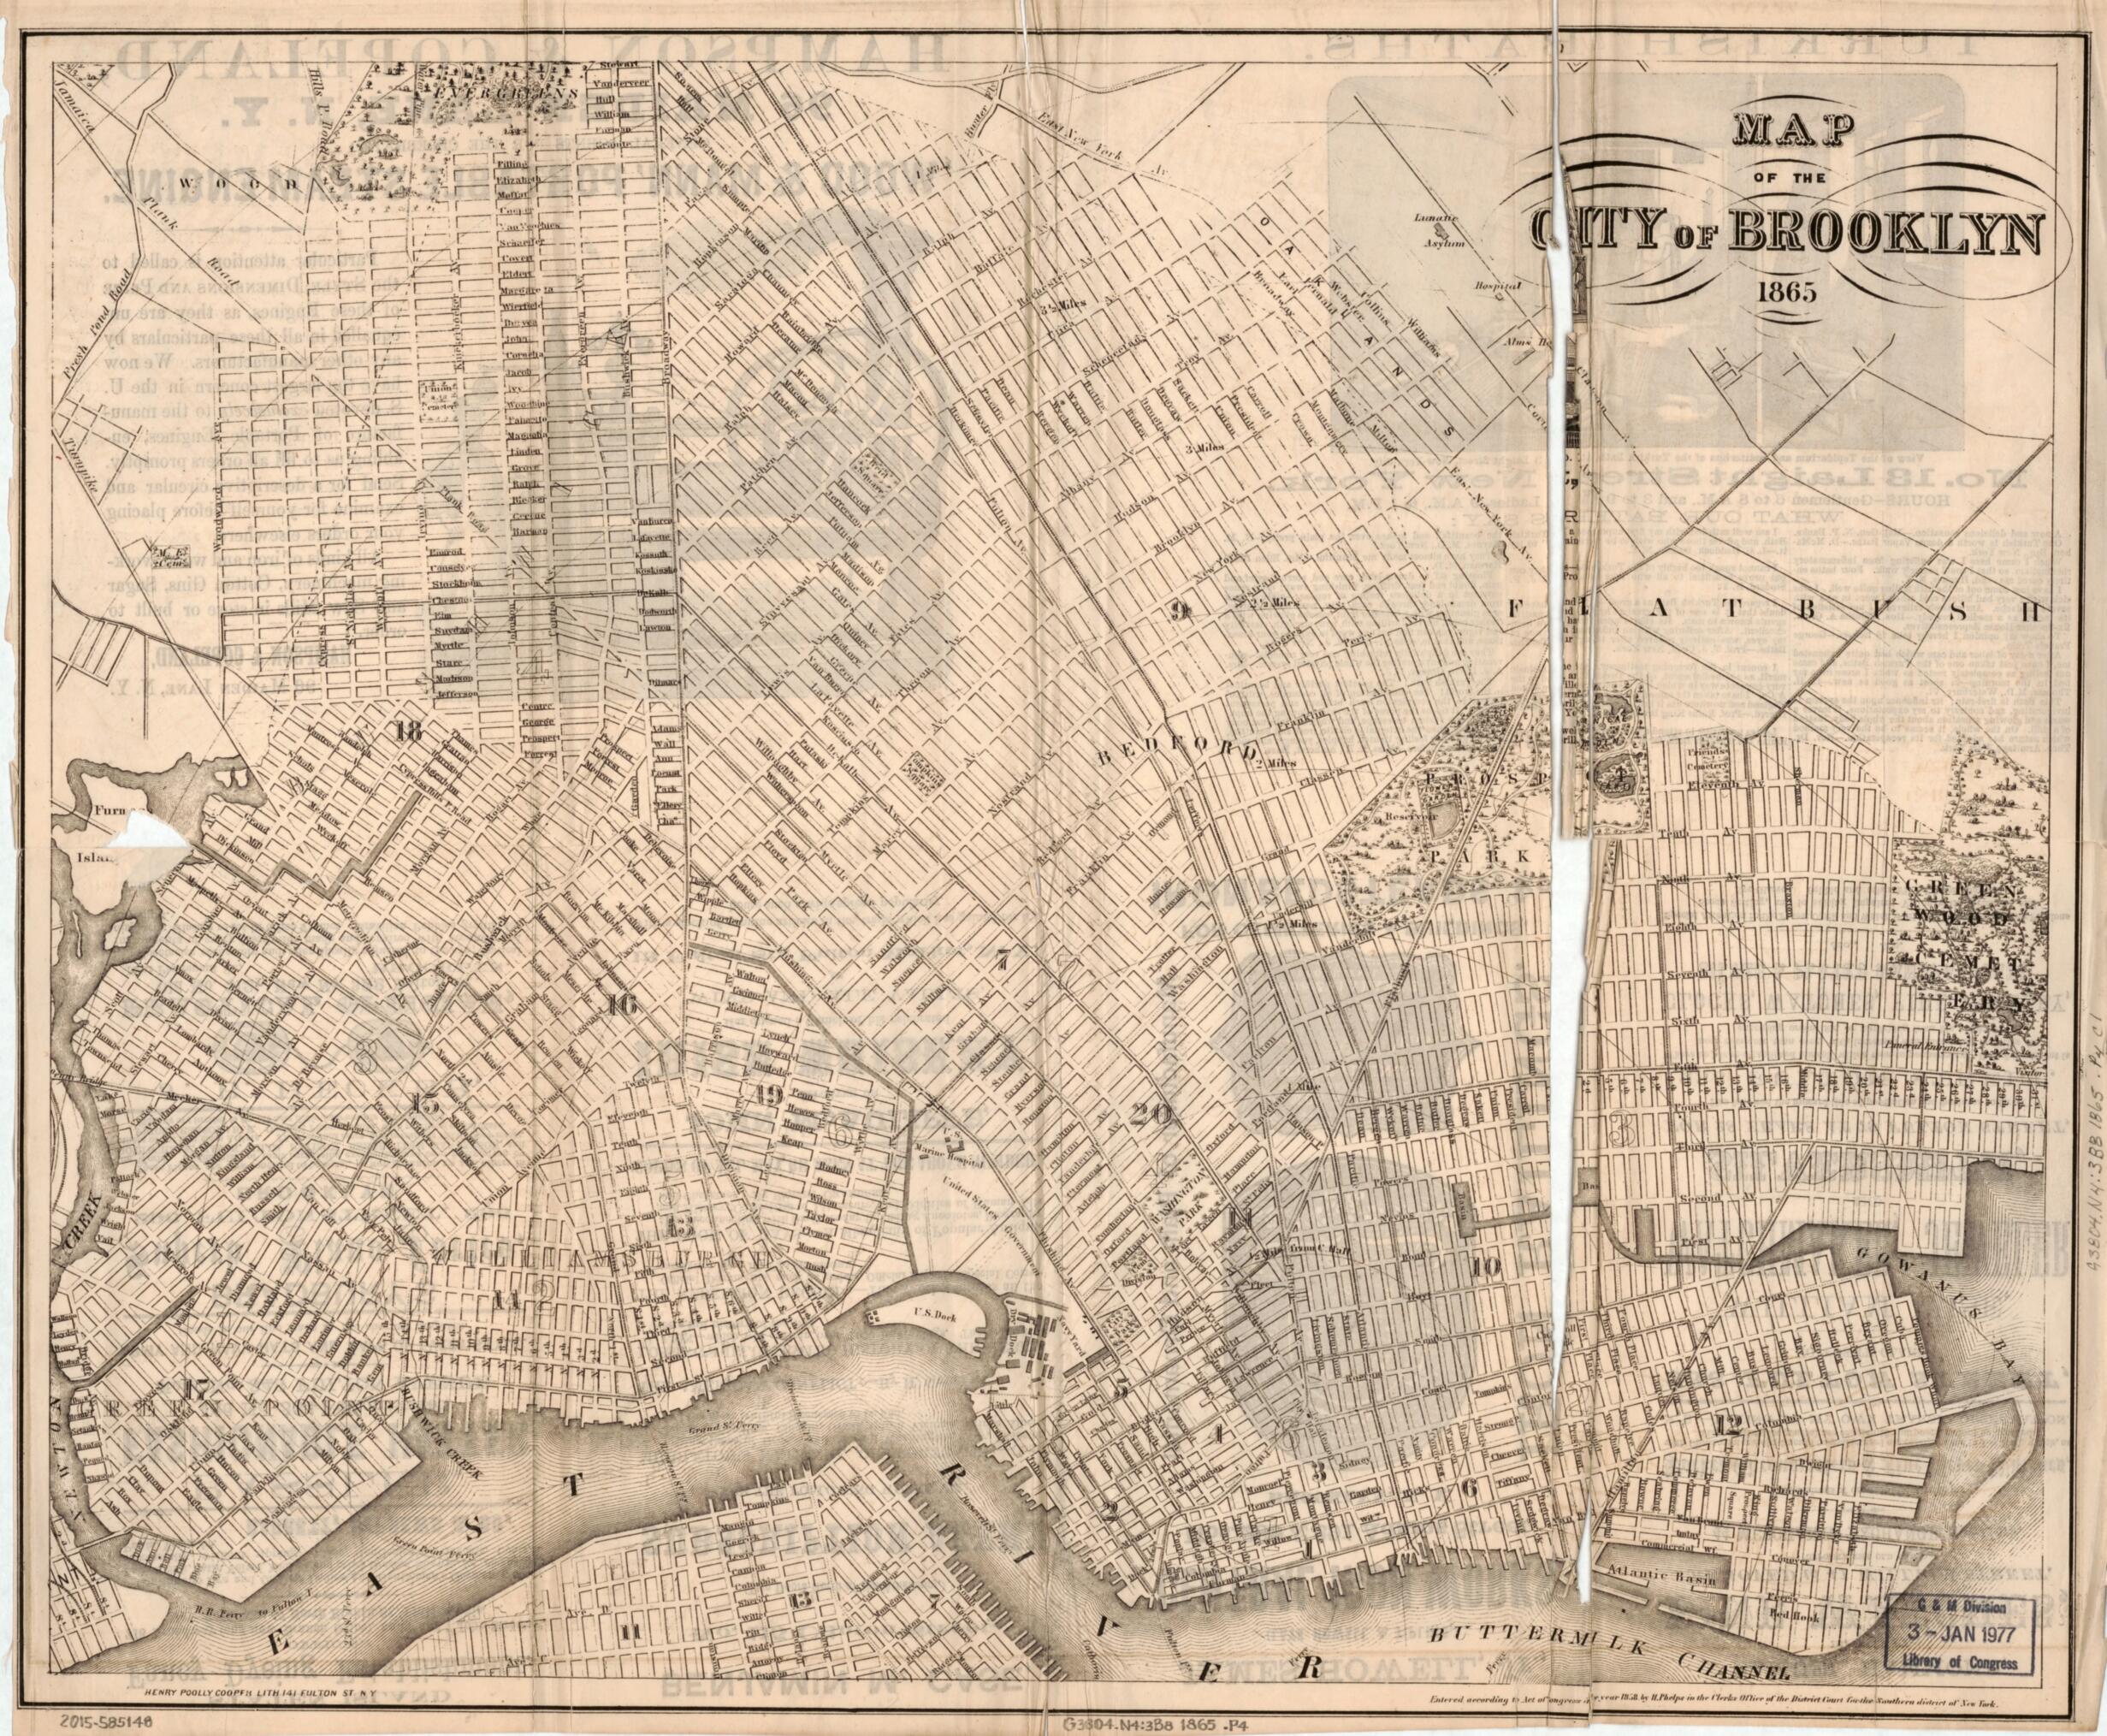 This old map of Map of the City of Brooklyn from 1865 was created by H. P. (Henry Poolly) Cooper, Humphrey Phelps in 1865